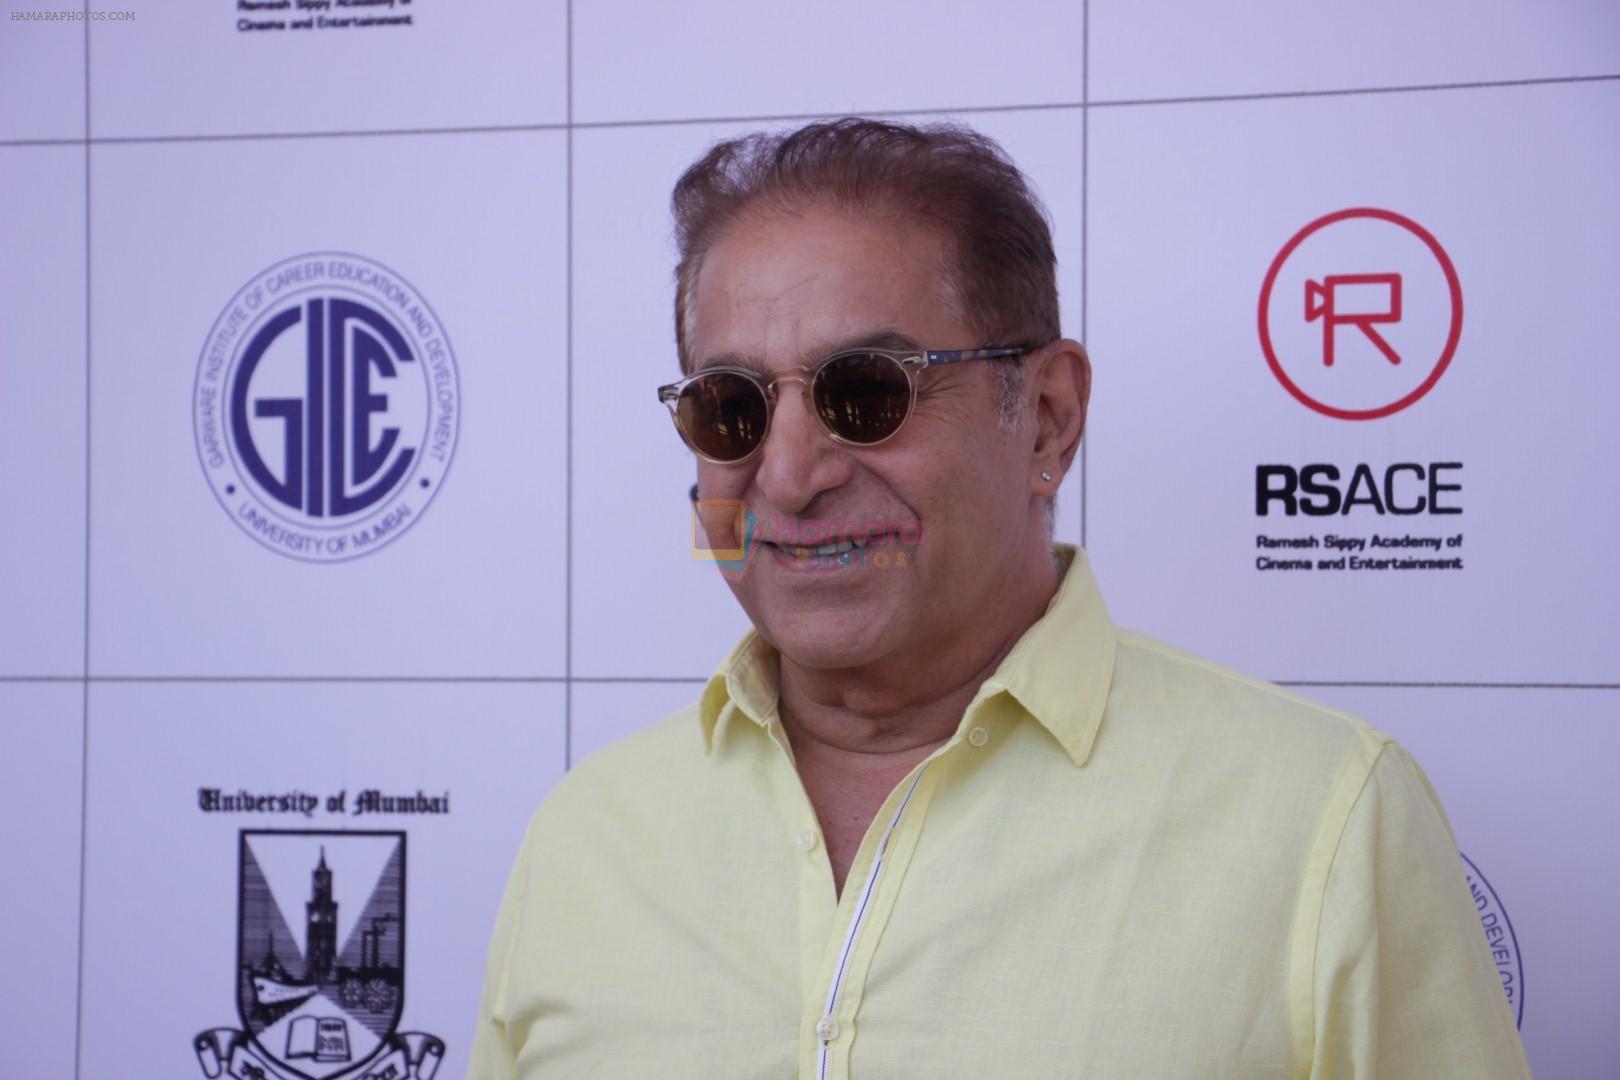 Dalip Tahil at the Launch of Ramesh Sippy Academy Of Cinema & Entertainment on 9th March 2017